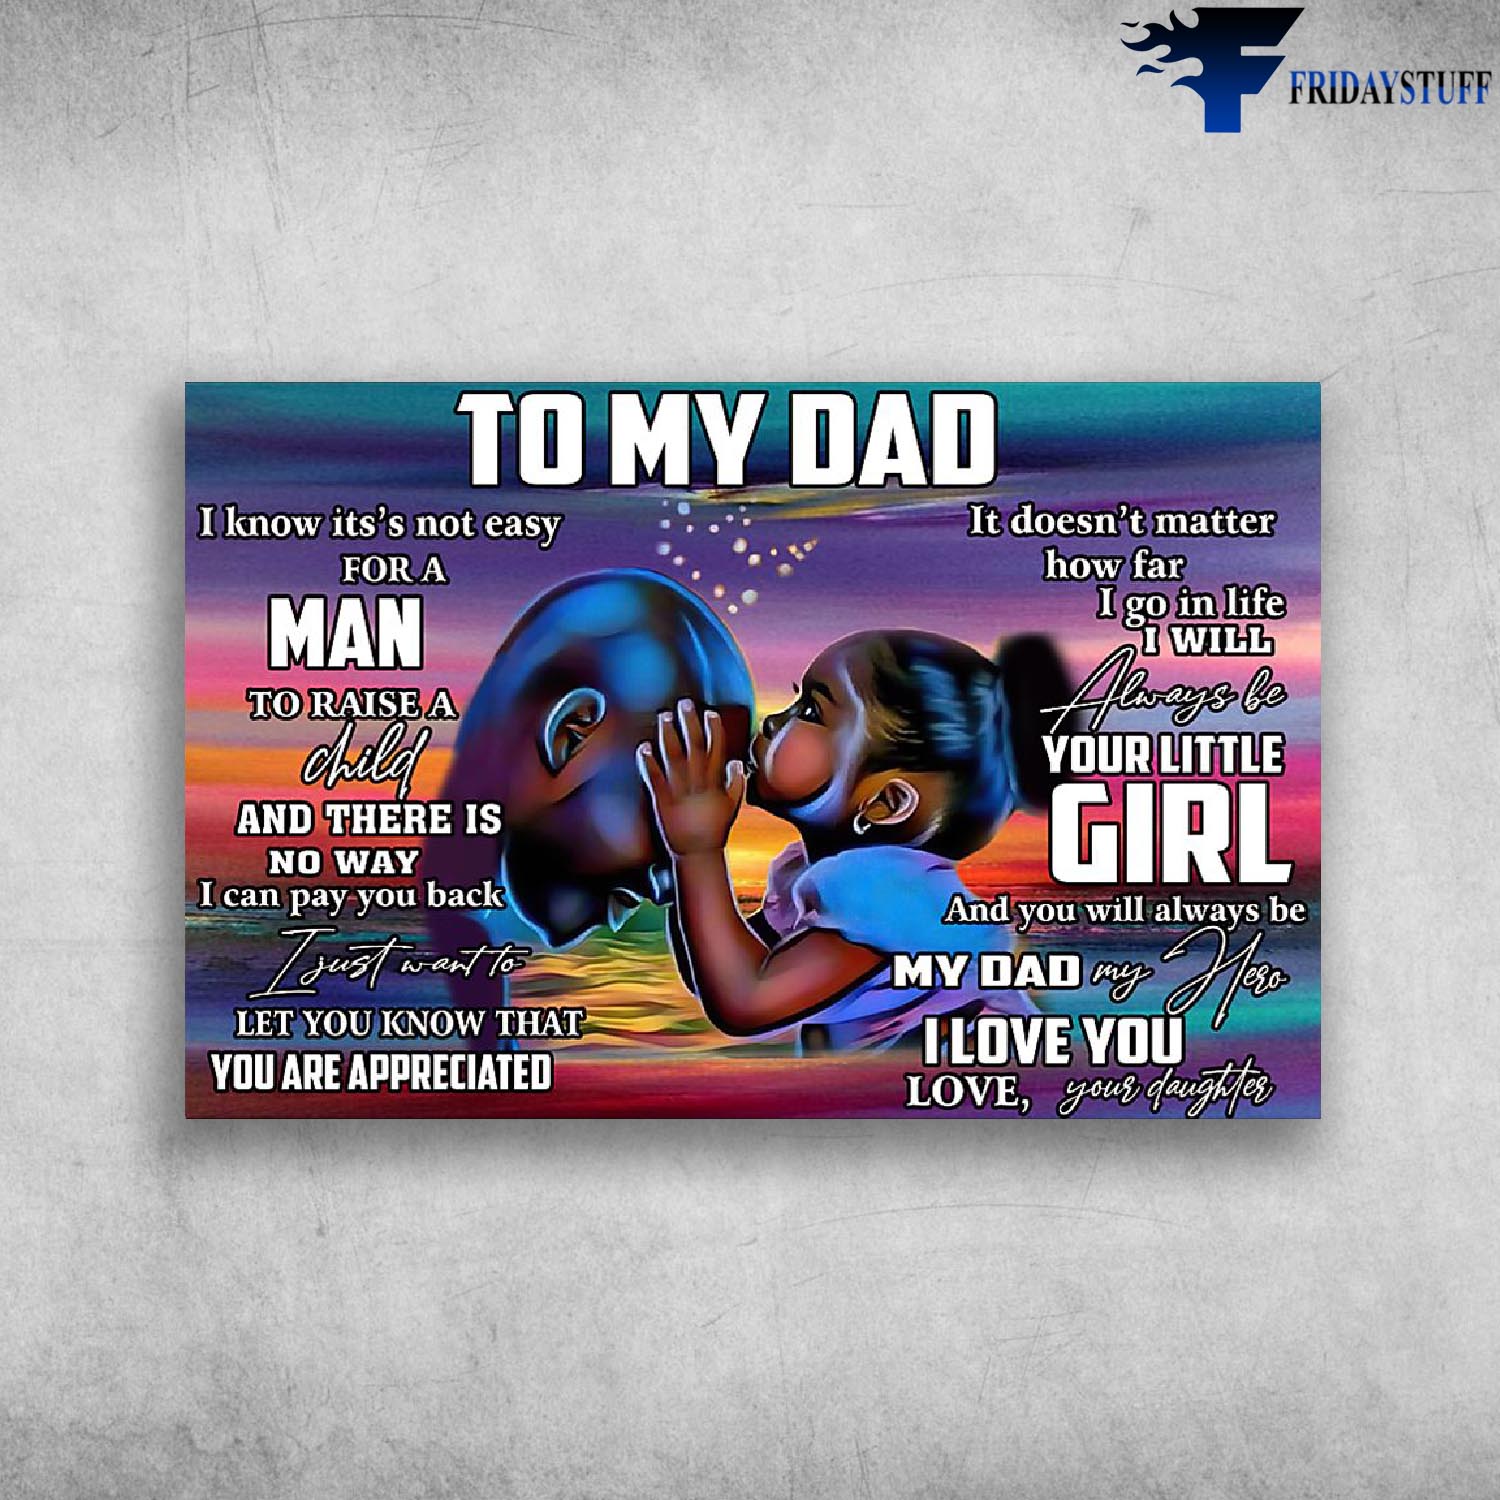 To My Dad I Know its' not easy for a Man To raise Child - Black Woman, Black Men